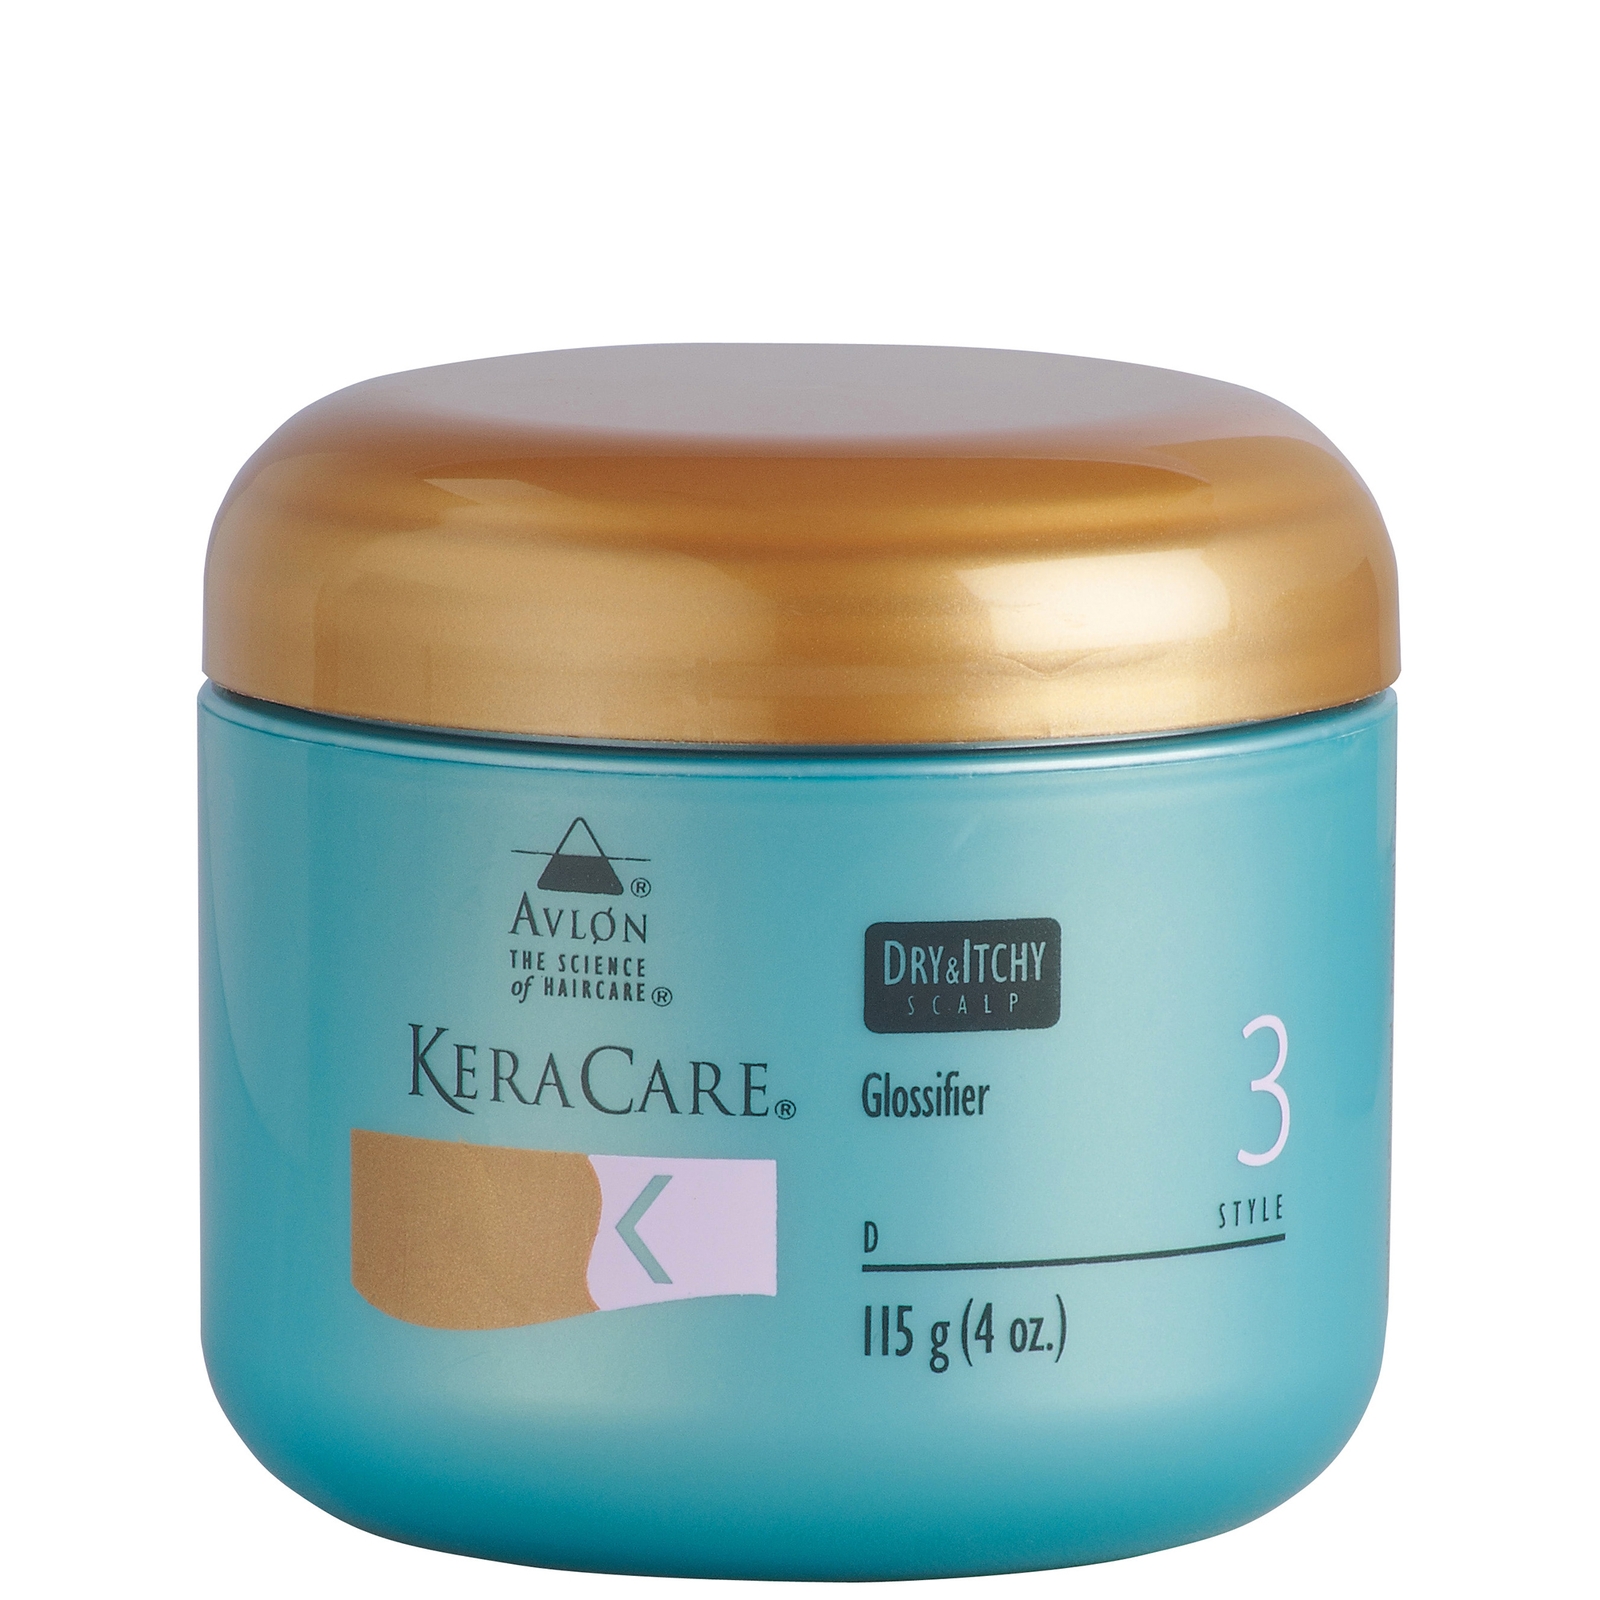 KeraCare Dry and Itchy Scalp Glossifier 110g